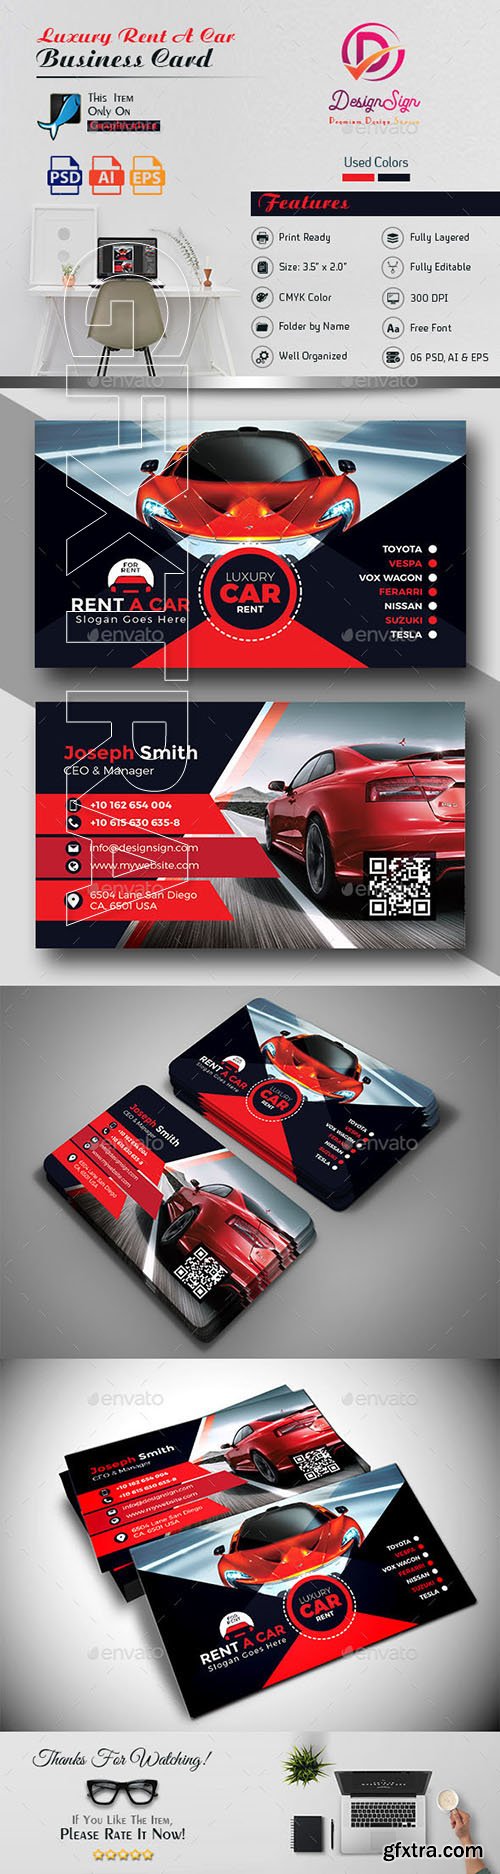 GraphicRiver - Luxury Rent A Car Business Card 20760320